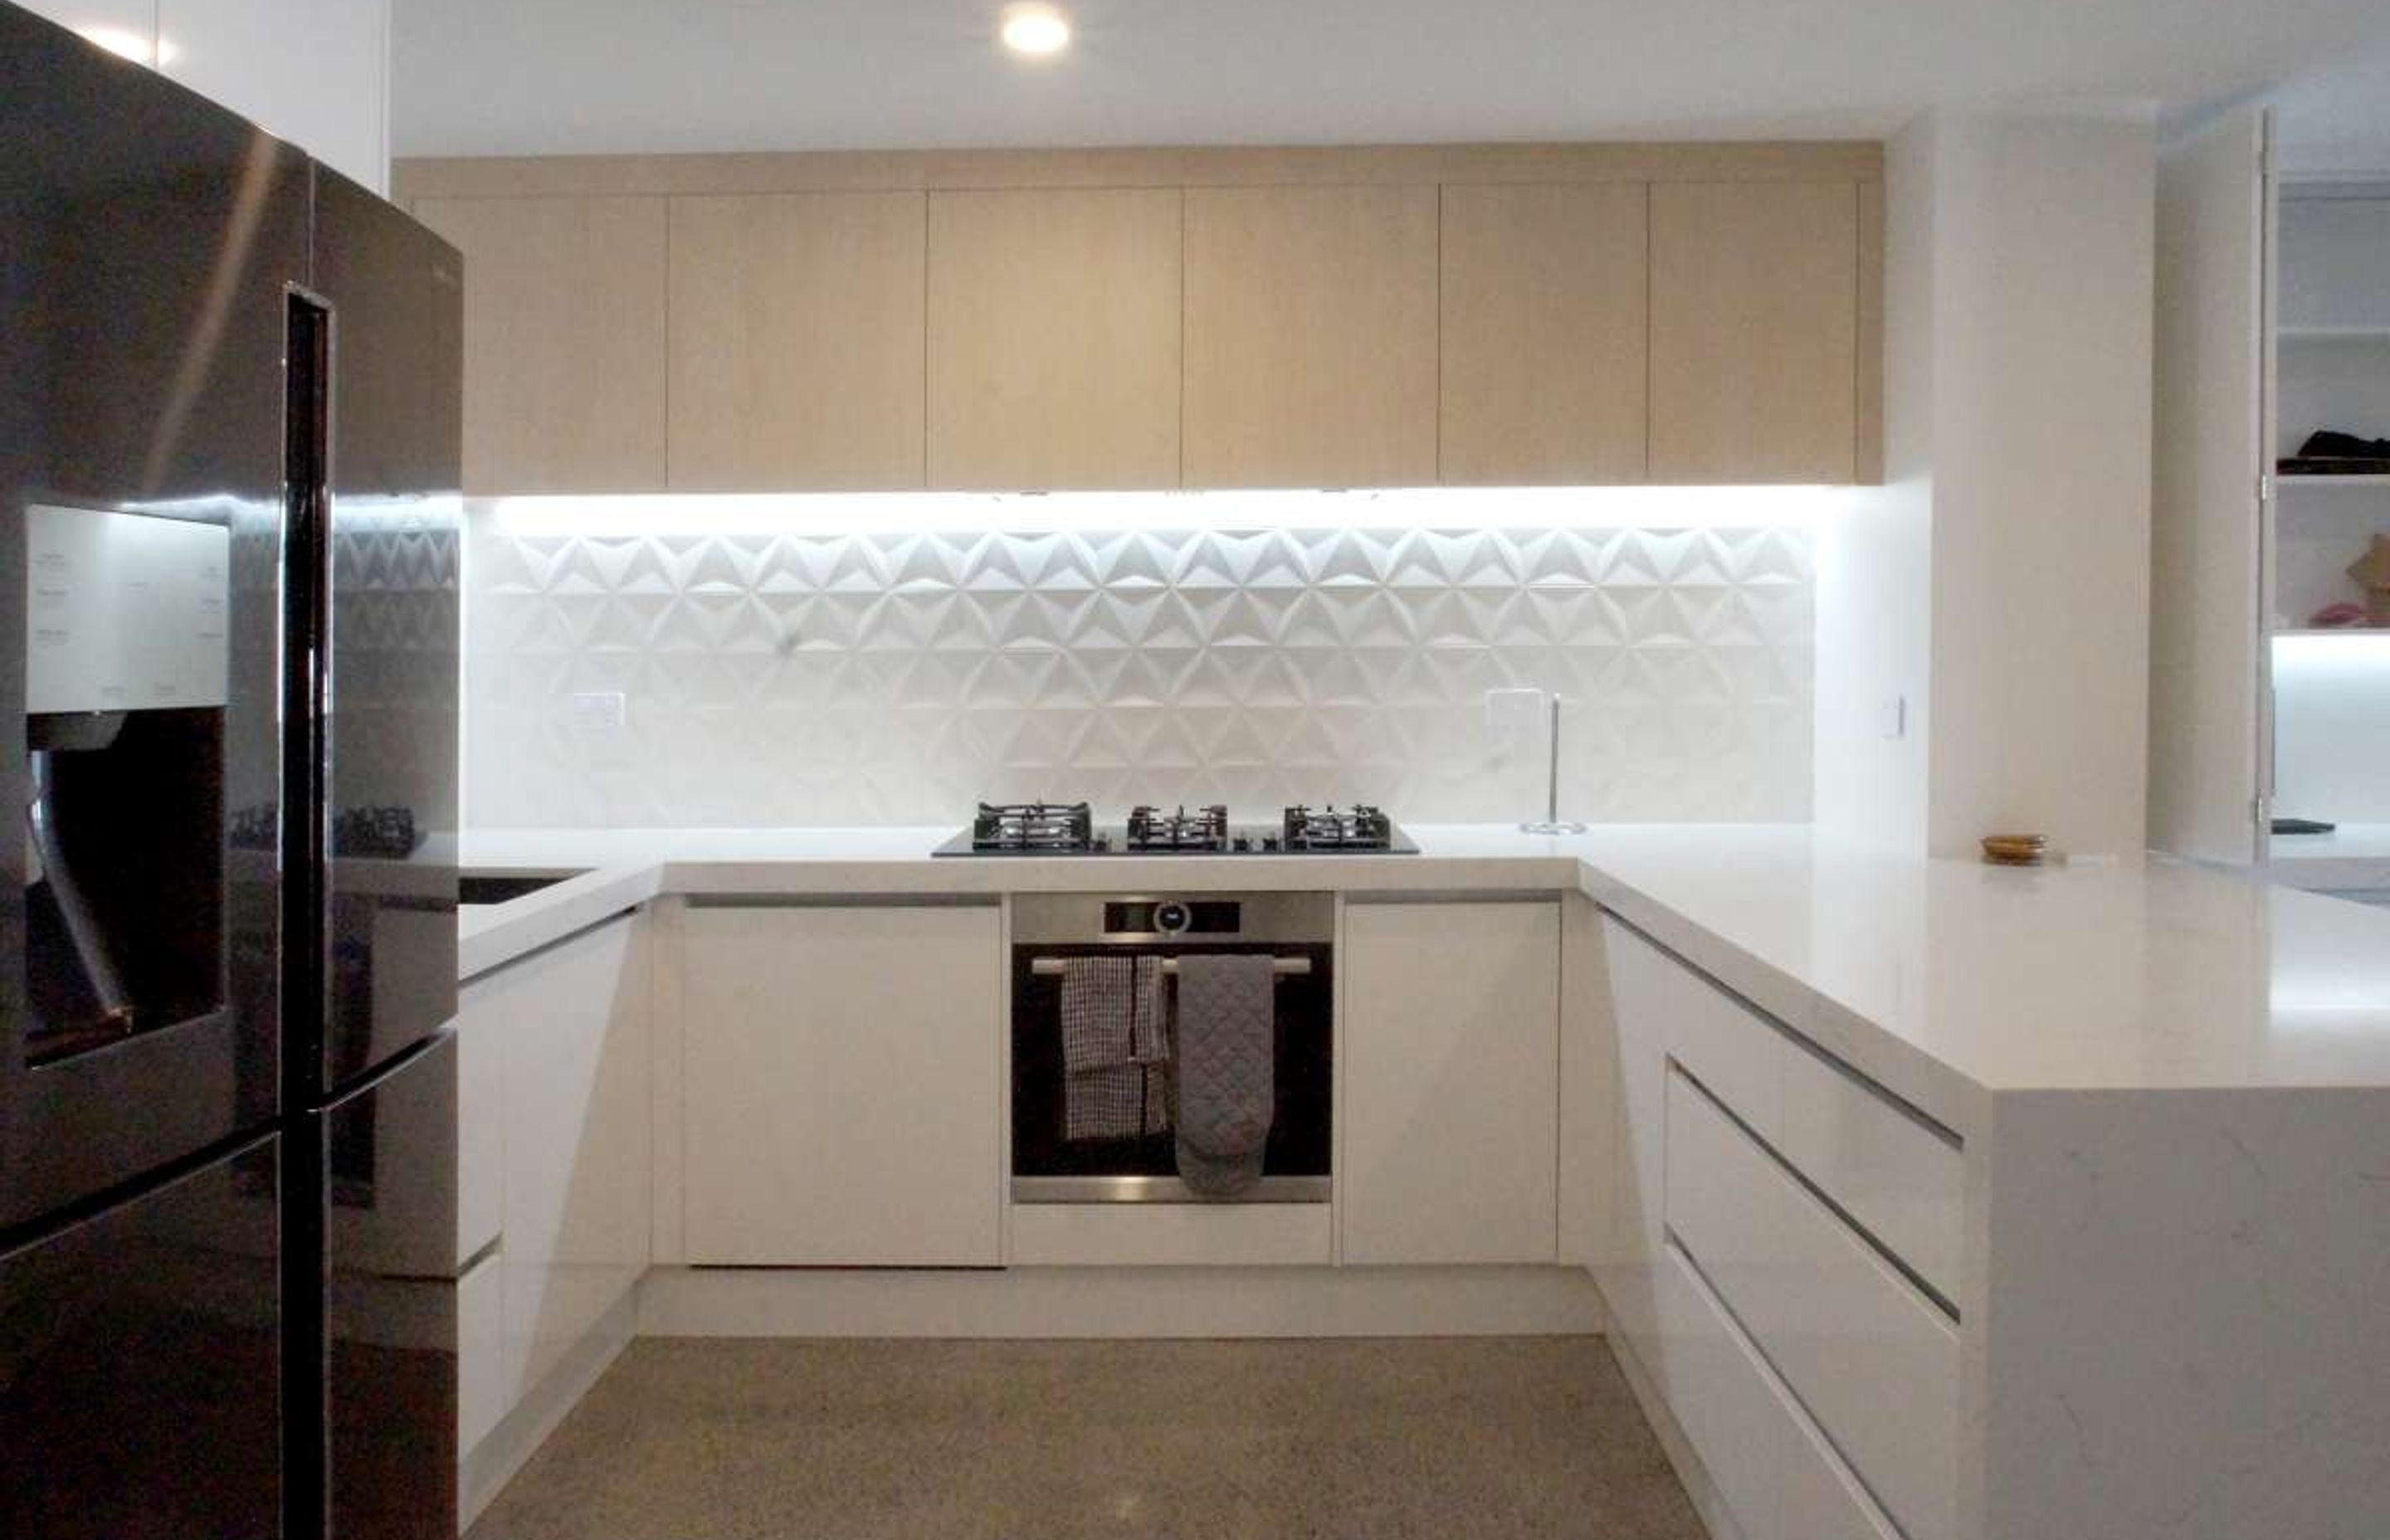 Kitchen renovation in Parnell. Concrete Floors, textured 3D hexagonal white backsplash, hot water tap sink, marble look stone engineered benchtop, LED lights on 'no handle' drawer set up
